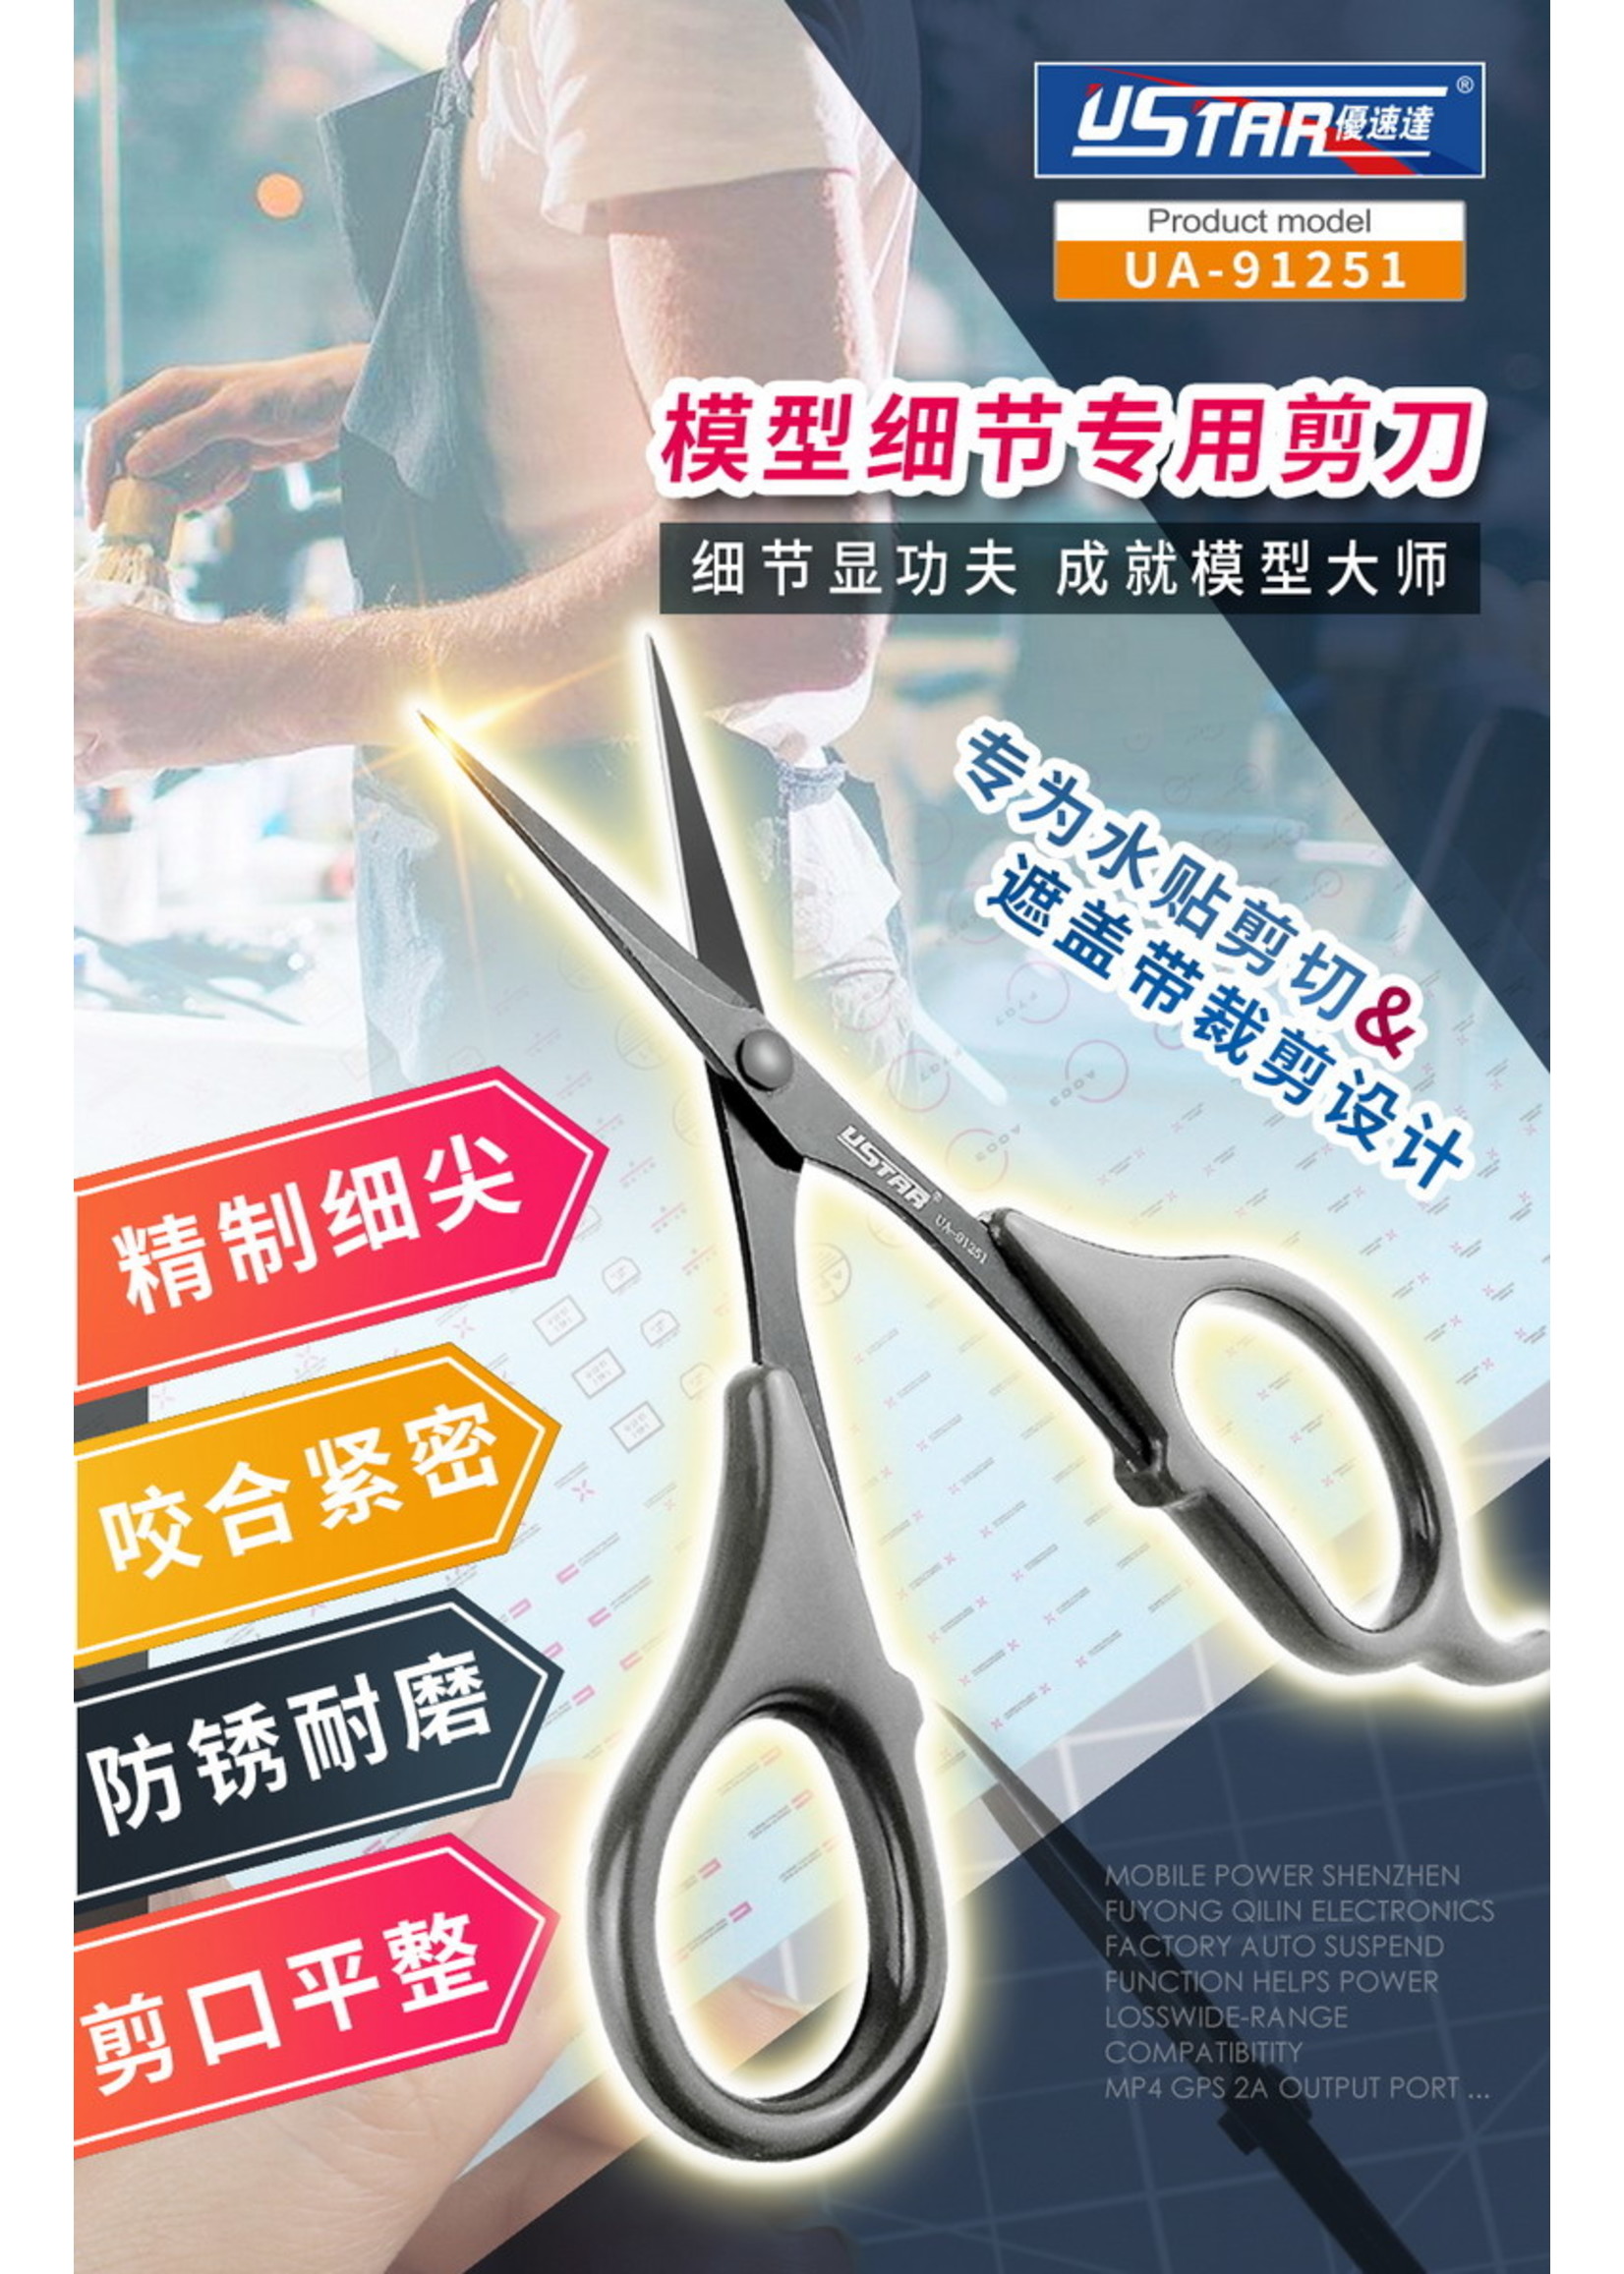 Ustar UA91251 - Precision Scissors For Decals and Masking Tape